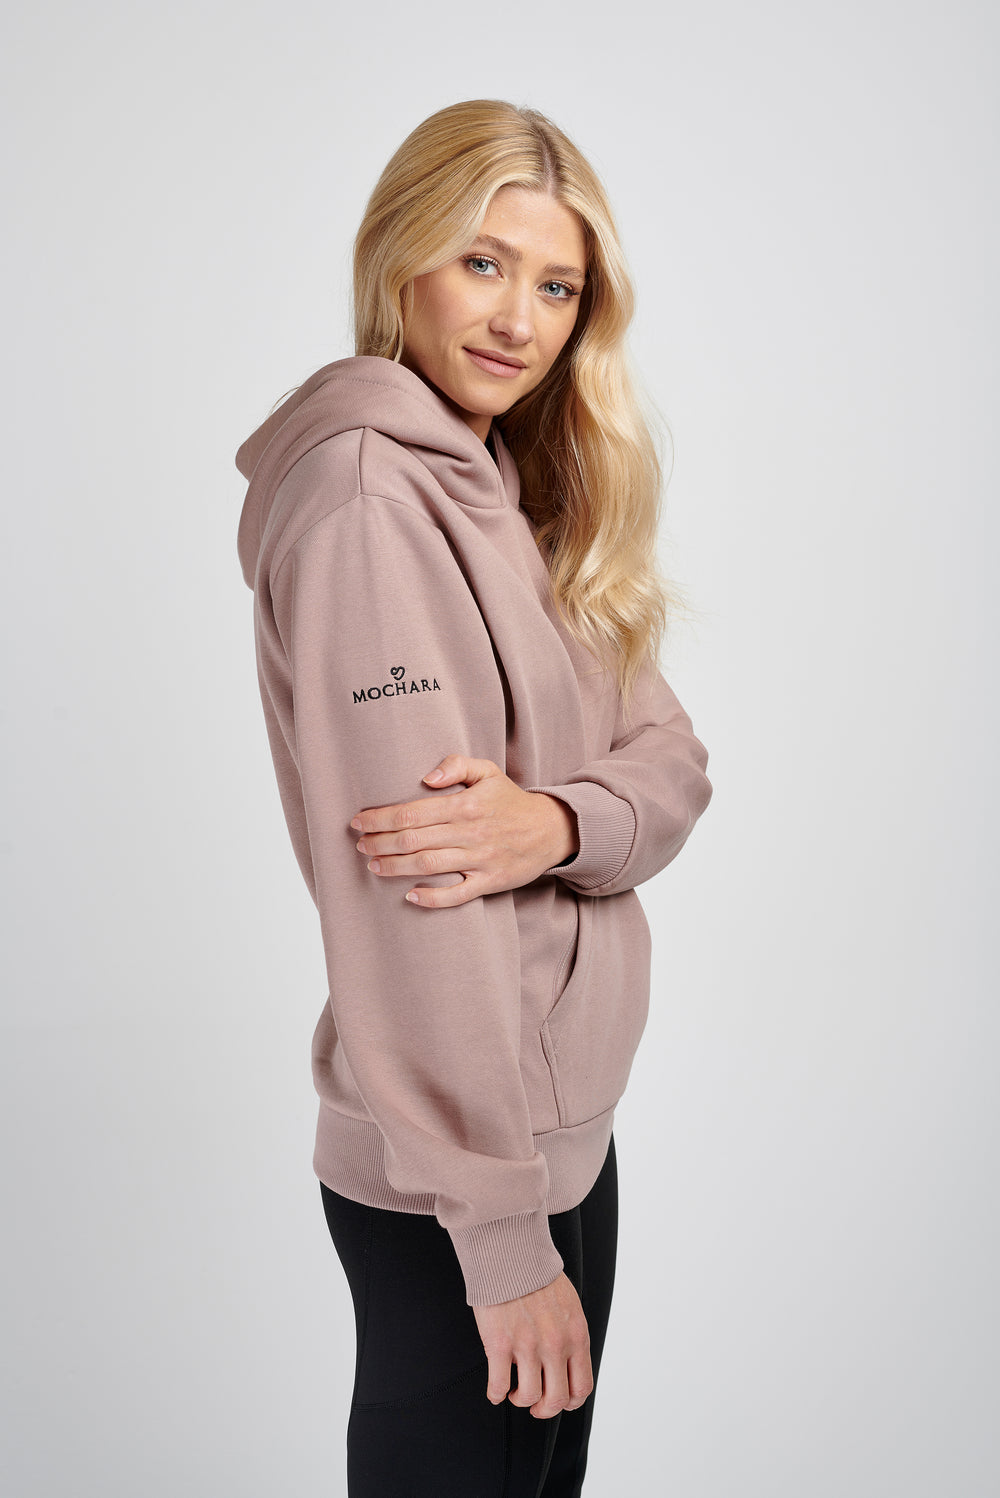 Mochara Hoodie-Southern Sport Horses-The Equestrian